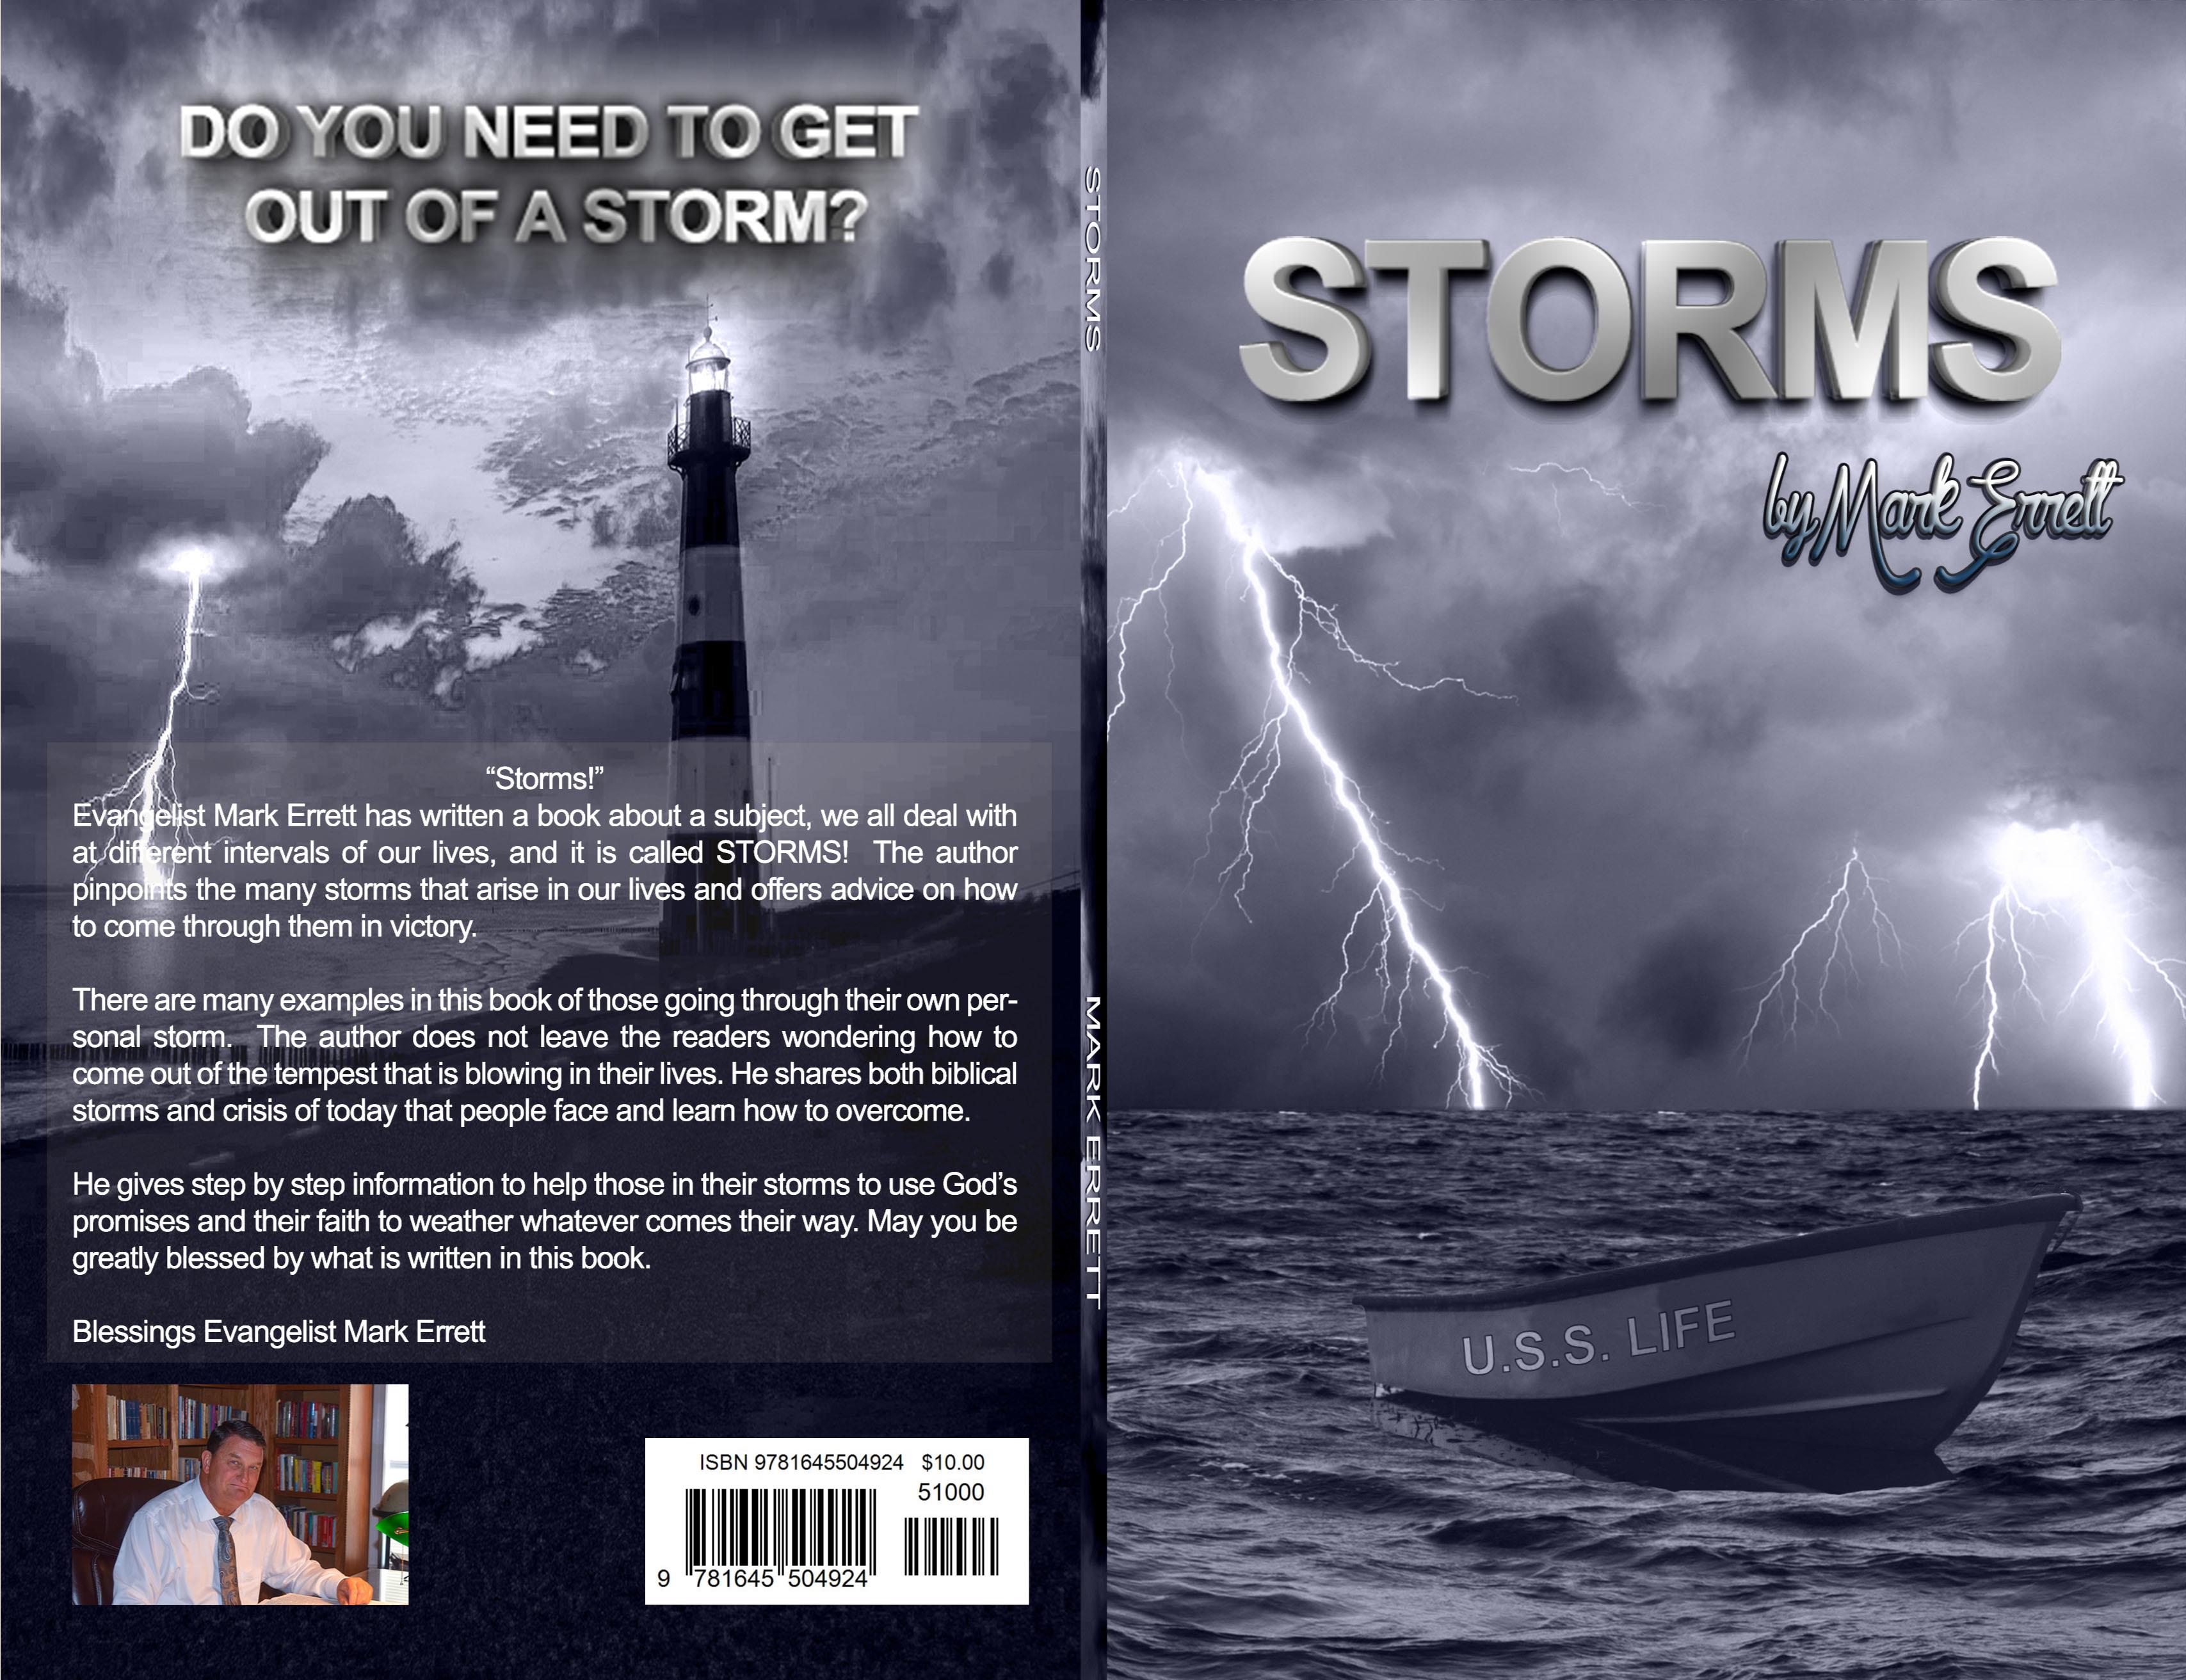 "Storms" cover image